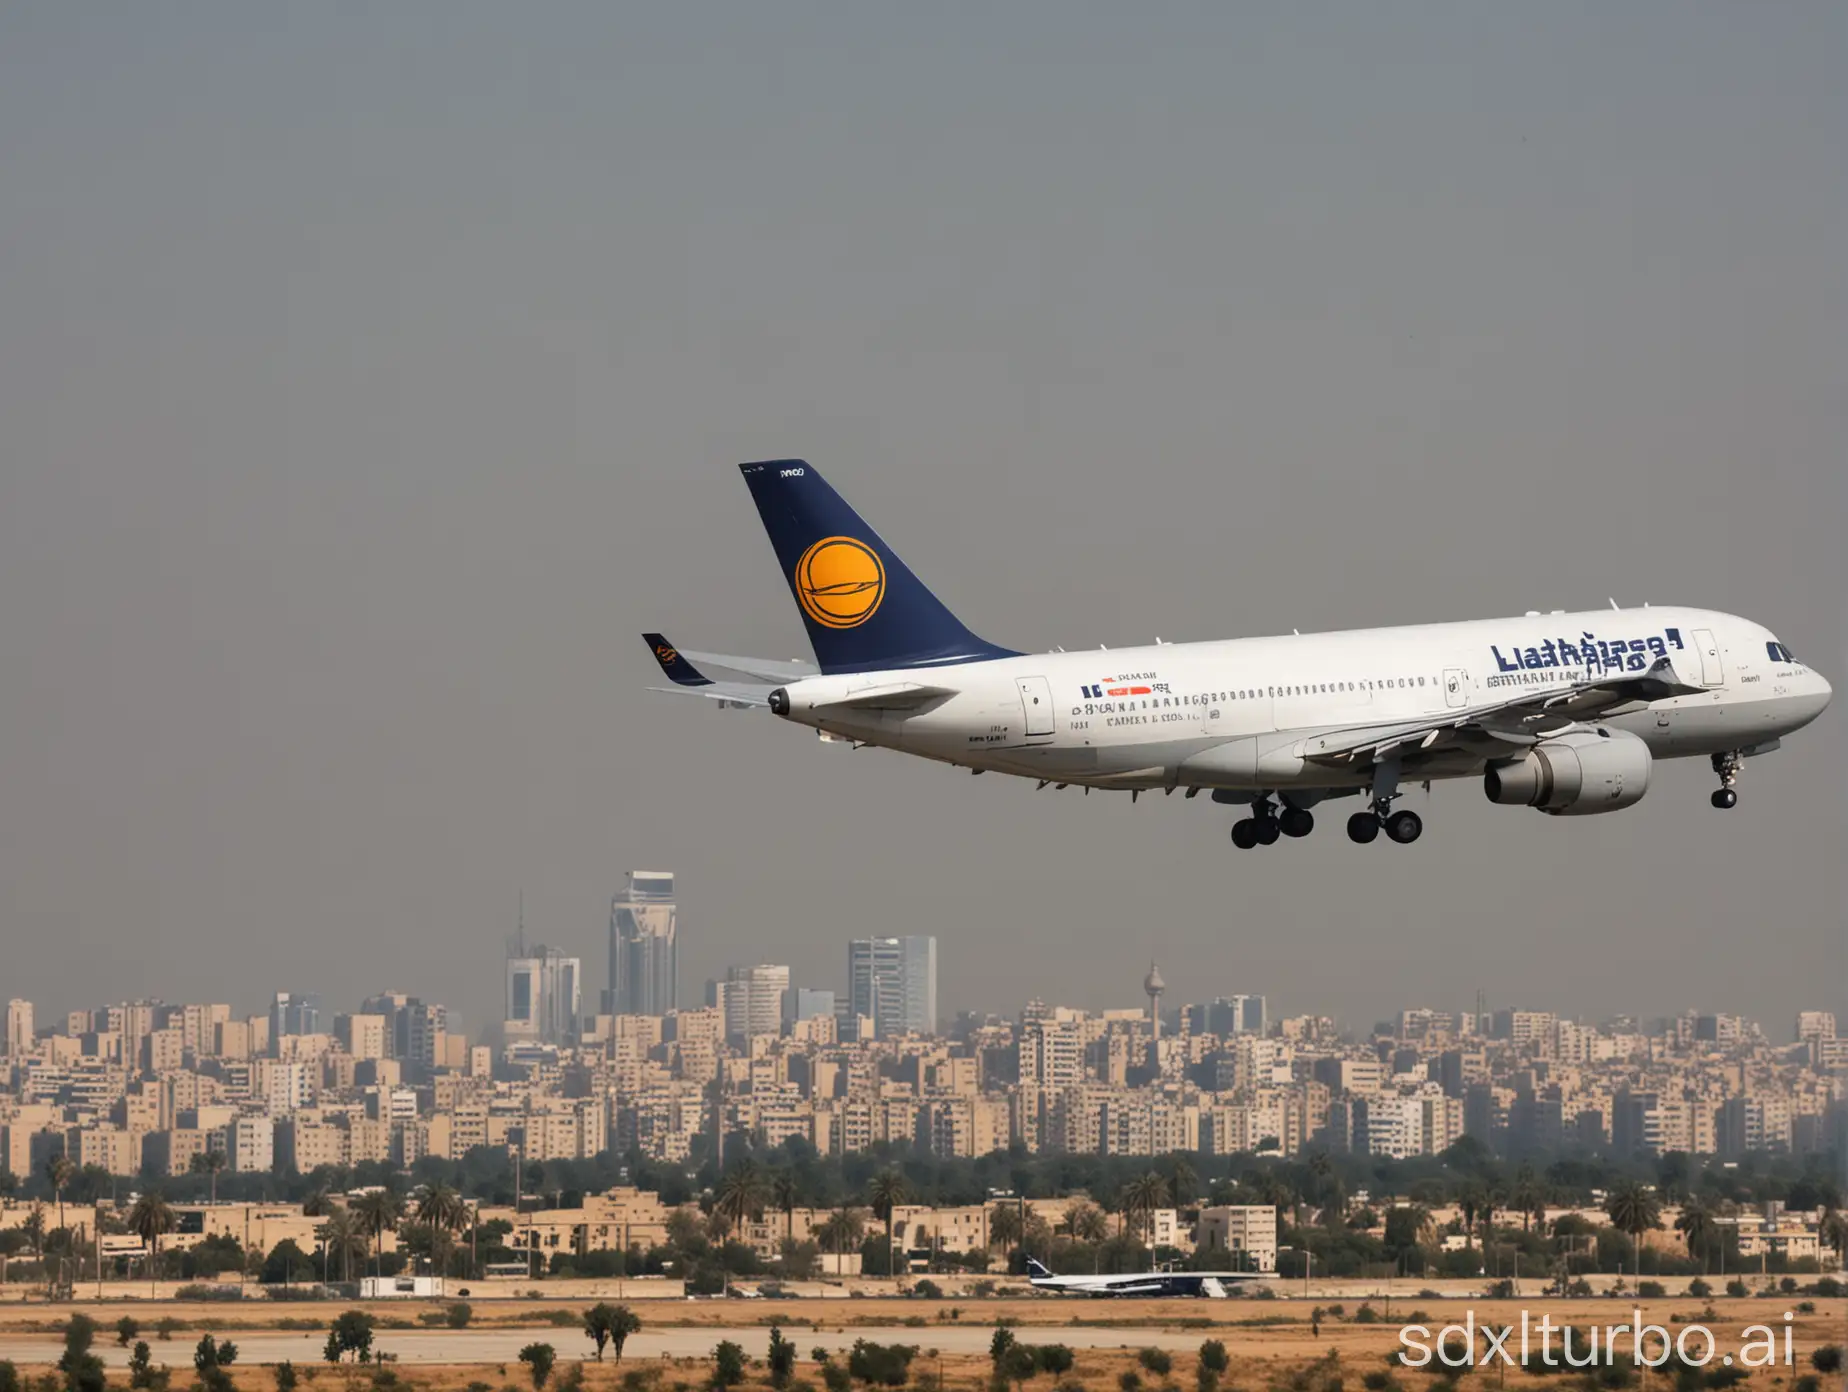 Lufthansa aircraft on approach to Cairo airport